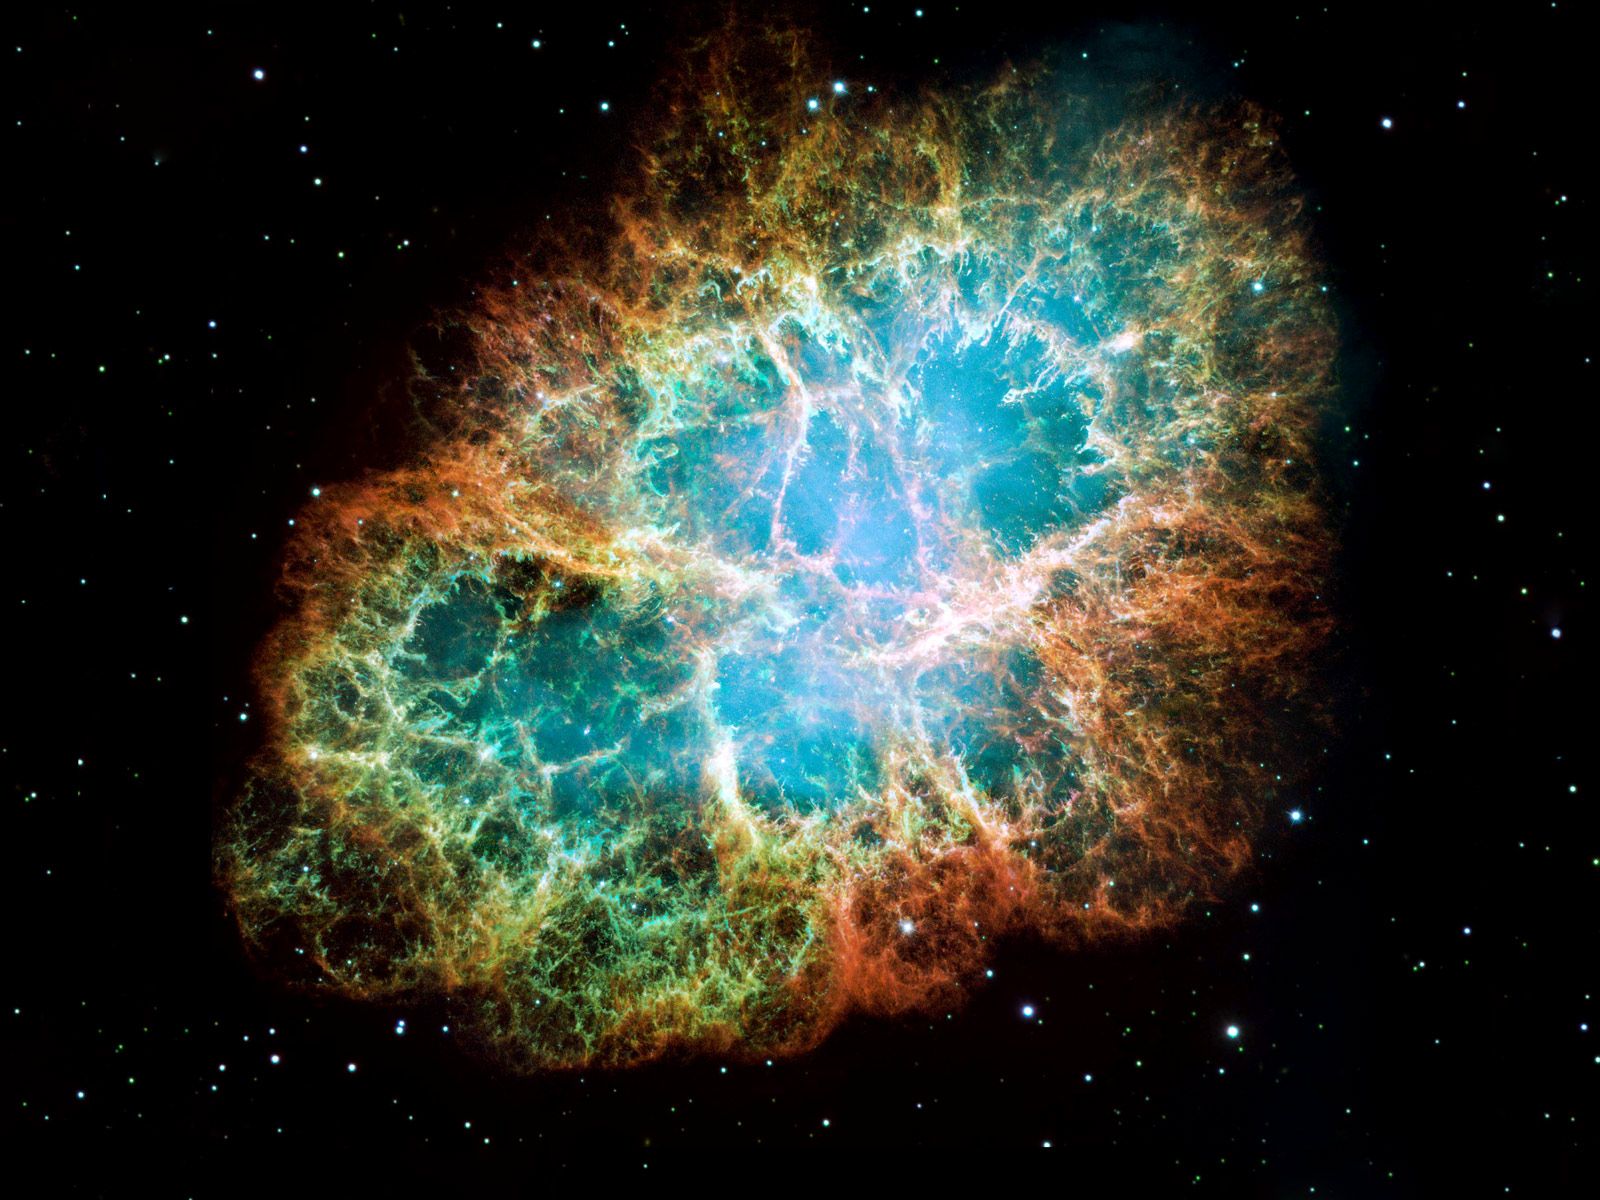 Gallery for - hubble telescope images hd wallpaper